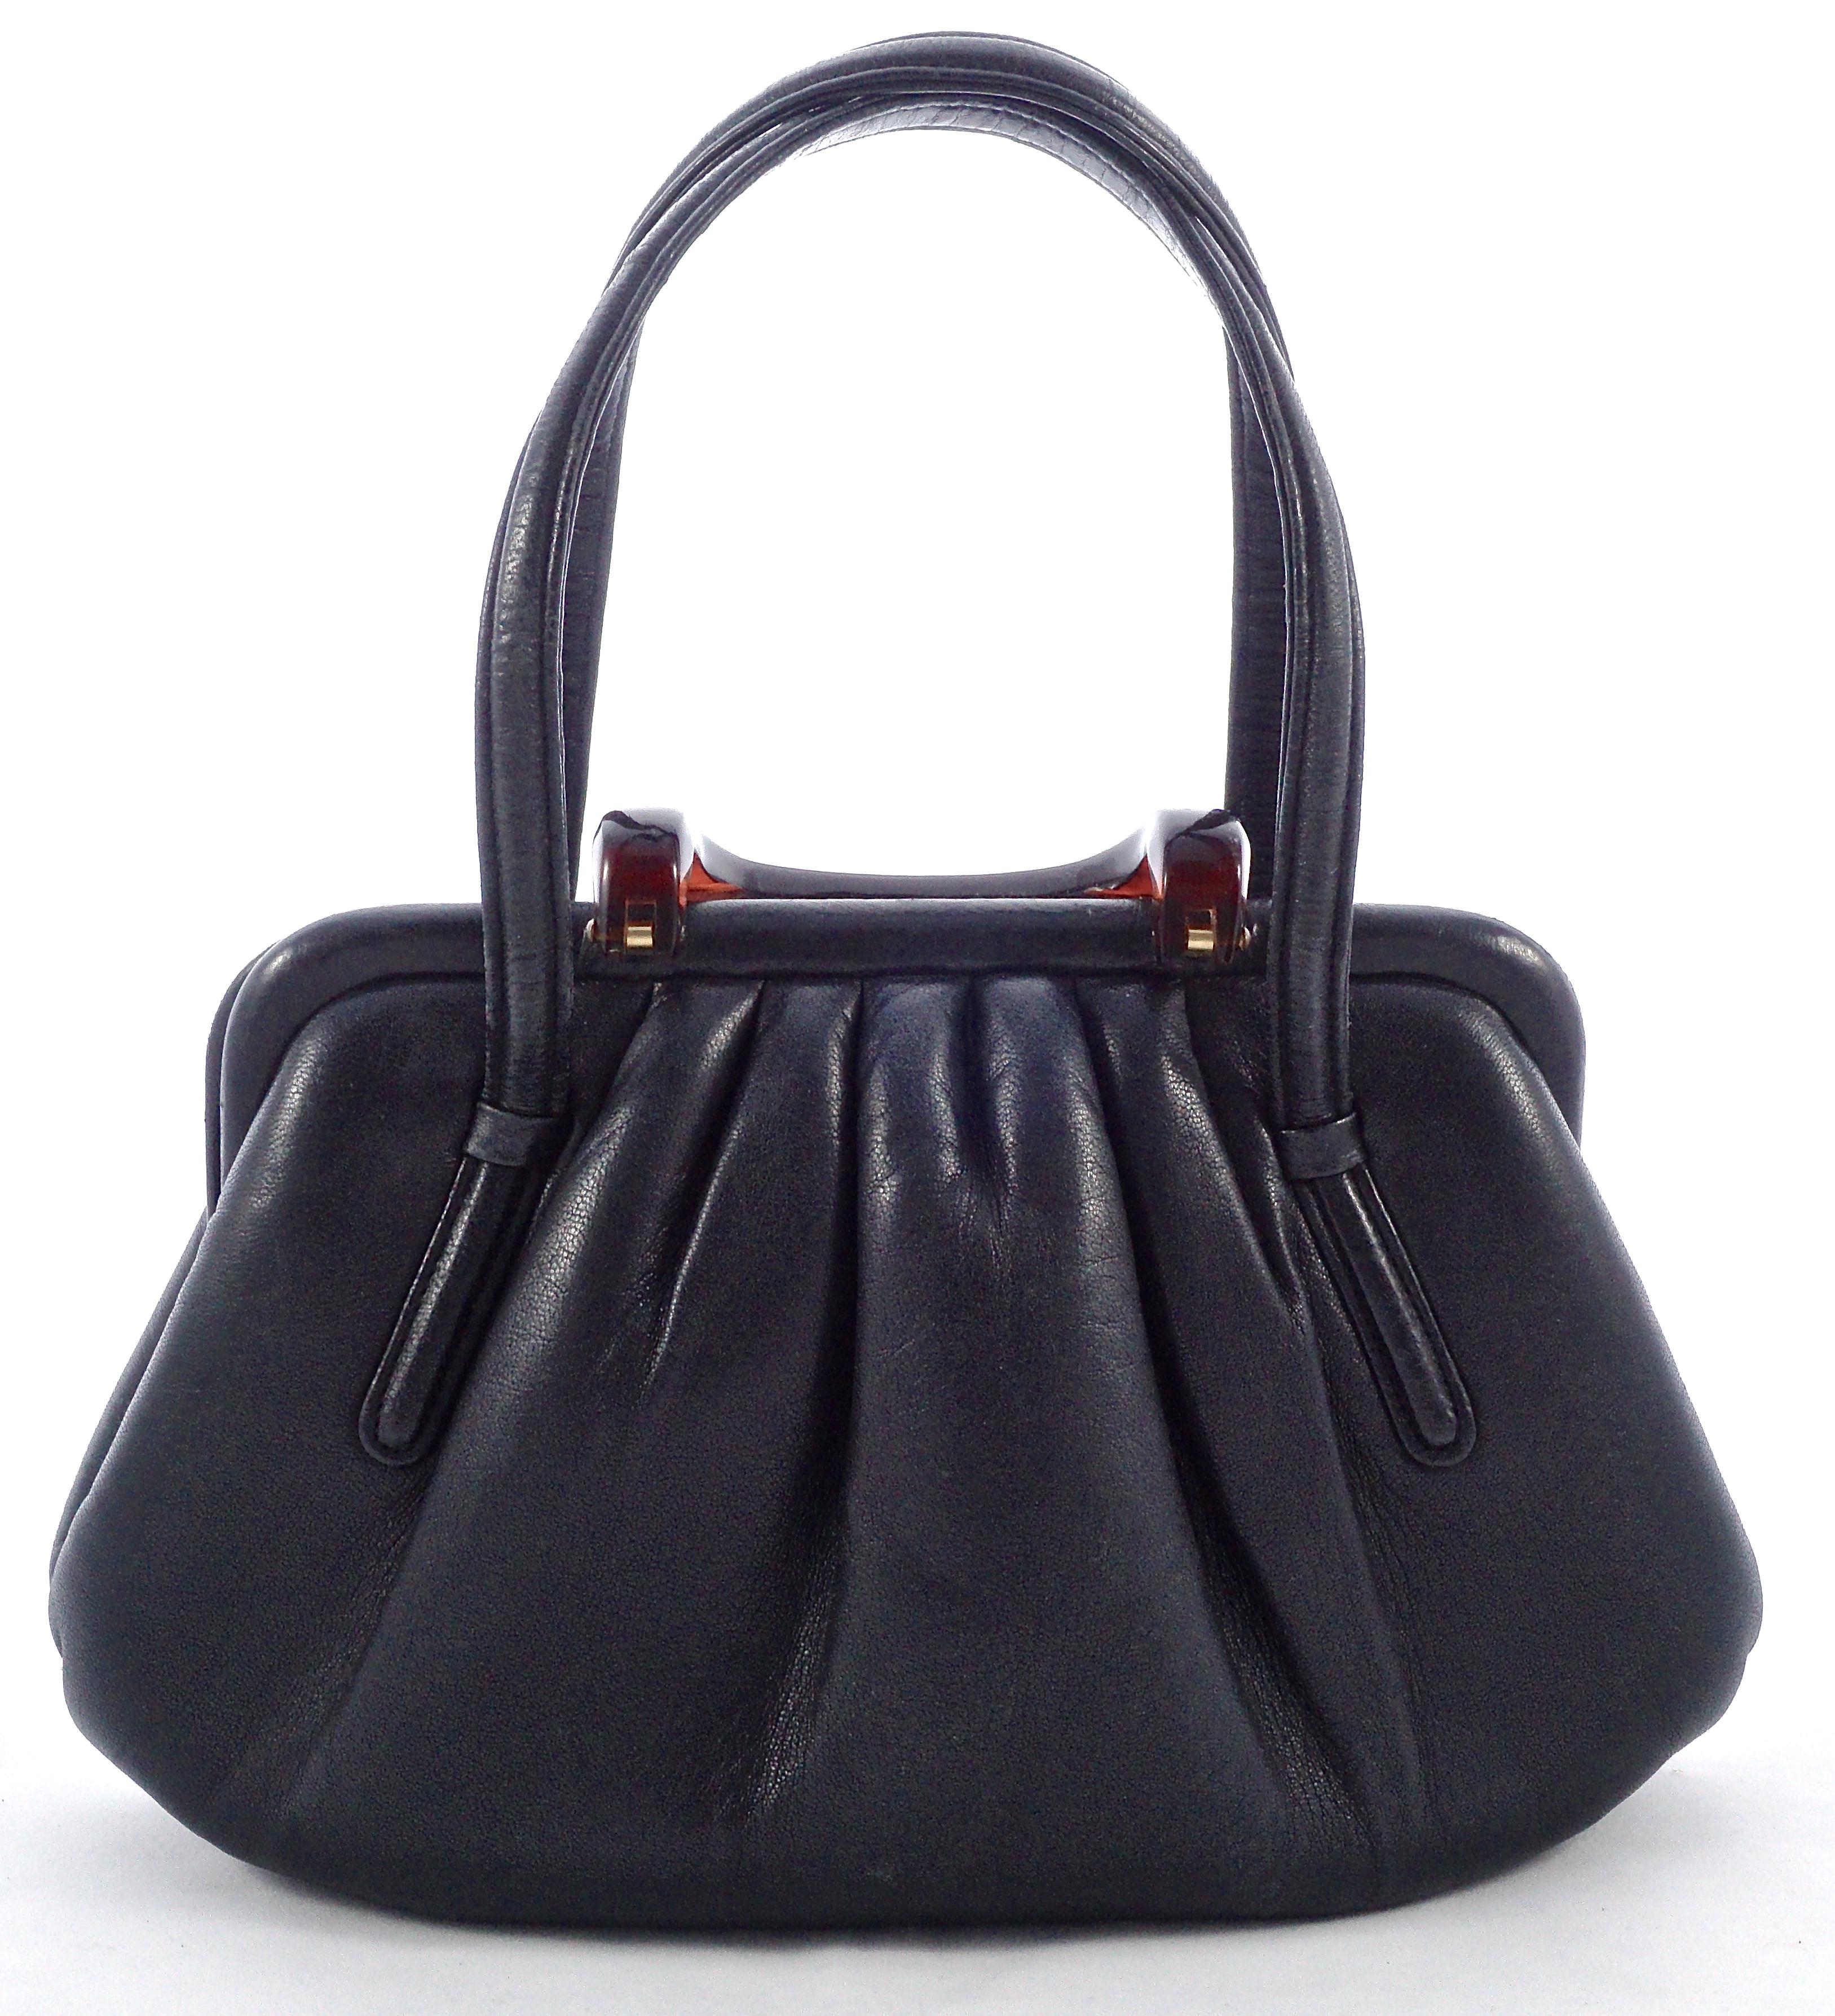 Beautiful Coblentz Italian soft black leather handbag with a faux tortoiseshell foldover clasp, and featuring five pleats to the front and back. Measuring 24.5cm / 9.64 inches at the base, height 15.5cm / 6.1 inches, and maximum depth approximately